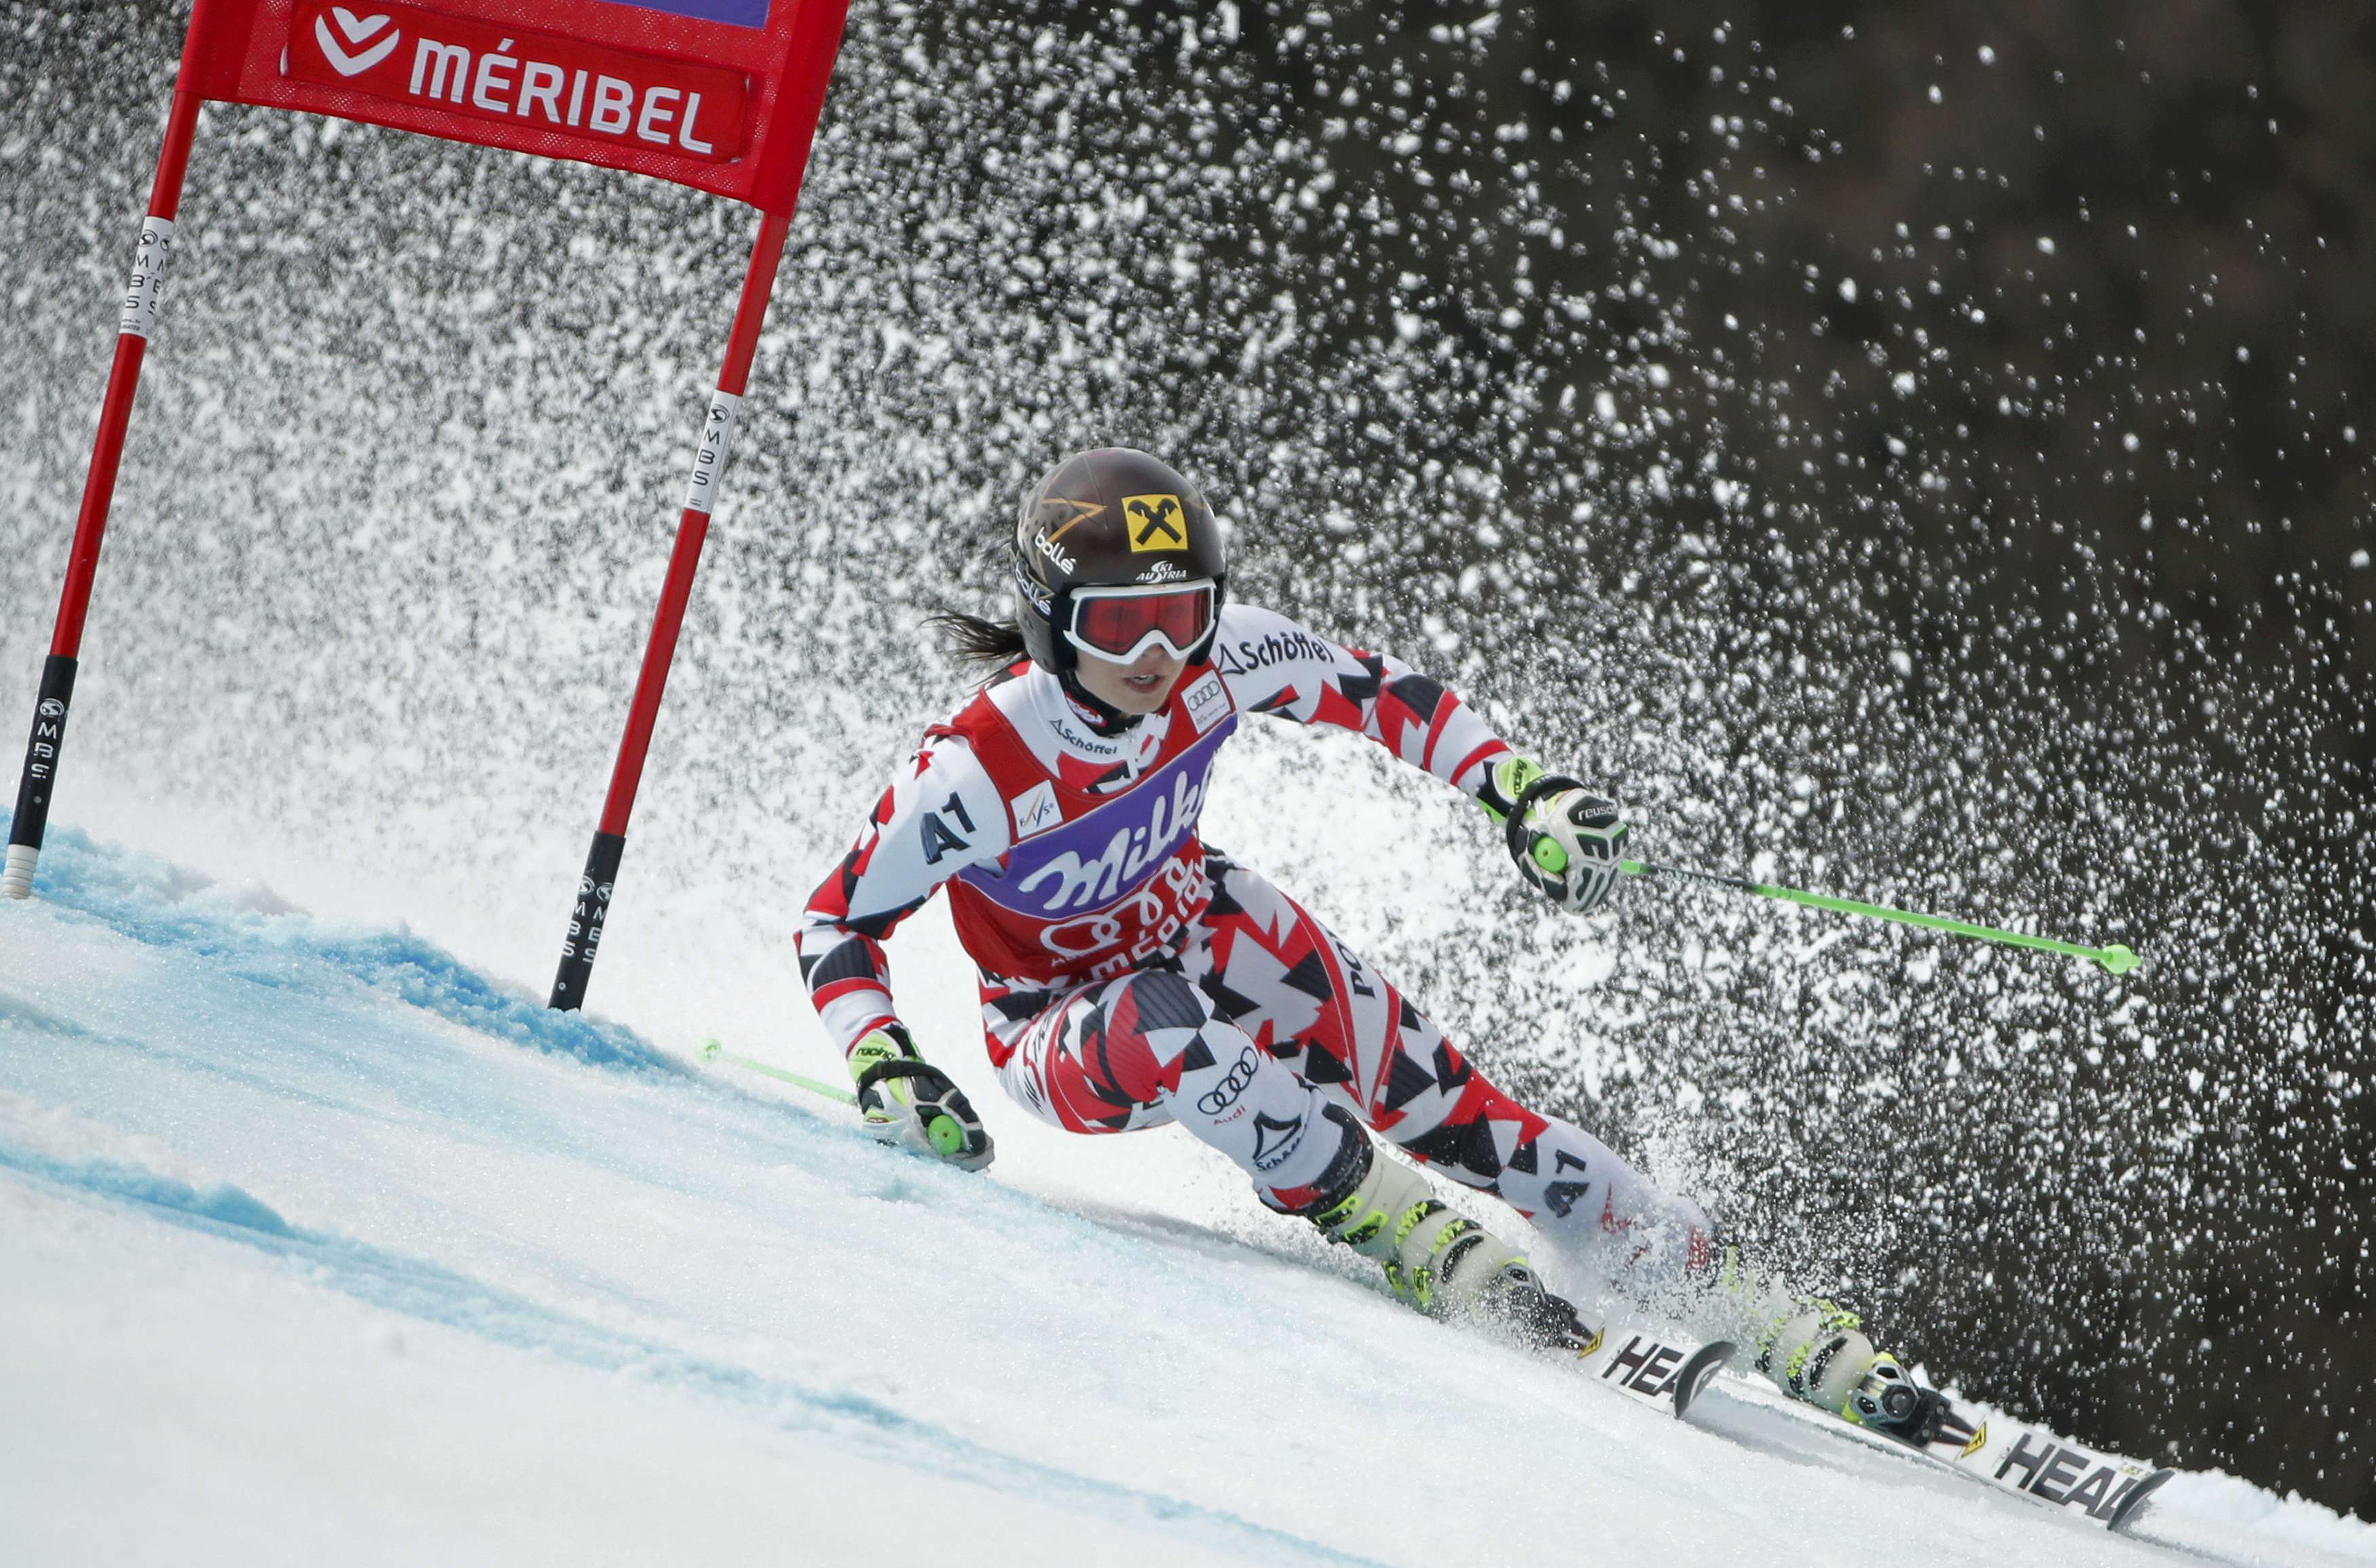 Anna Fenninger of Austria skis during the second run of the women's giant slalom race at the Alpine Skiing World Cup Finals in Meribel, in the French Alps, March 22, 2015 REUTERS/Christian Hartmann